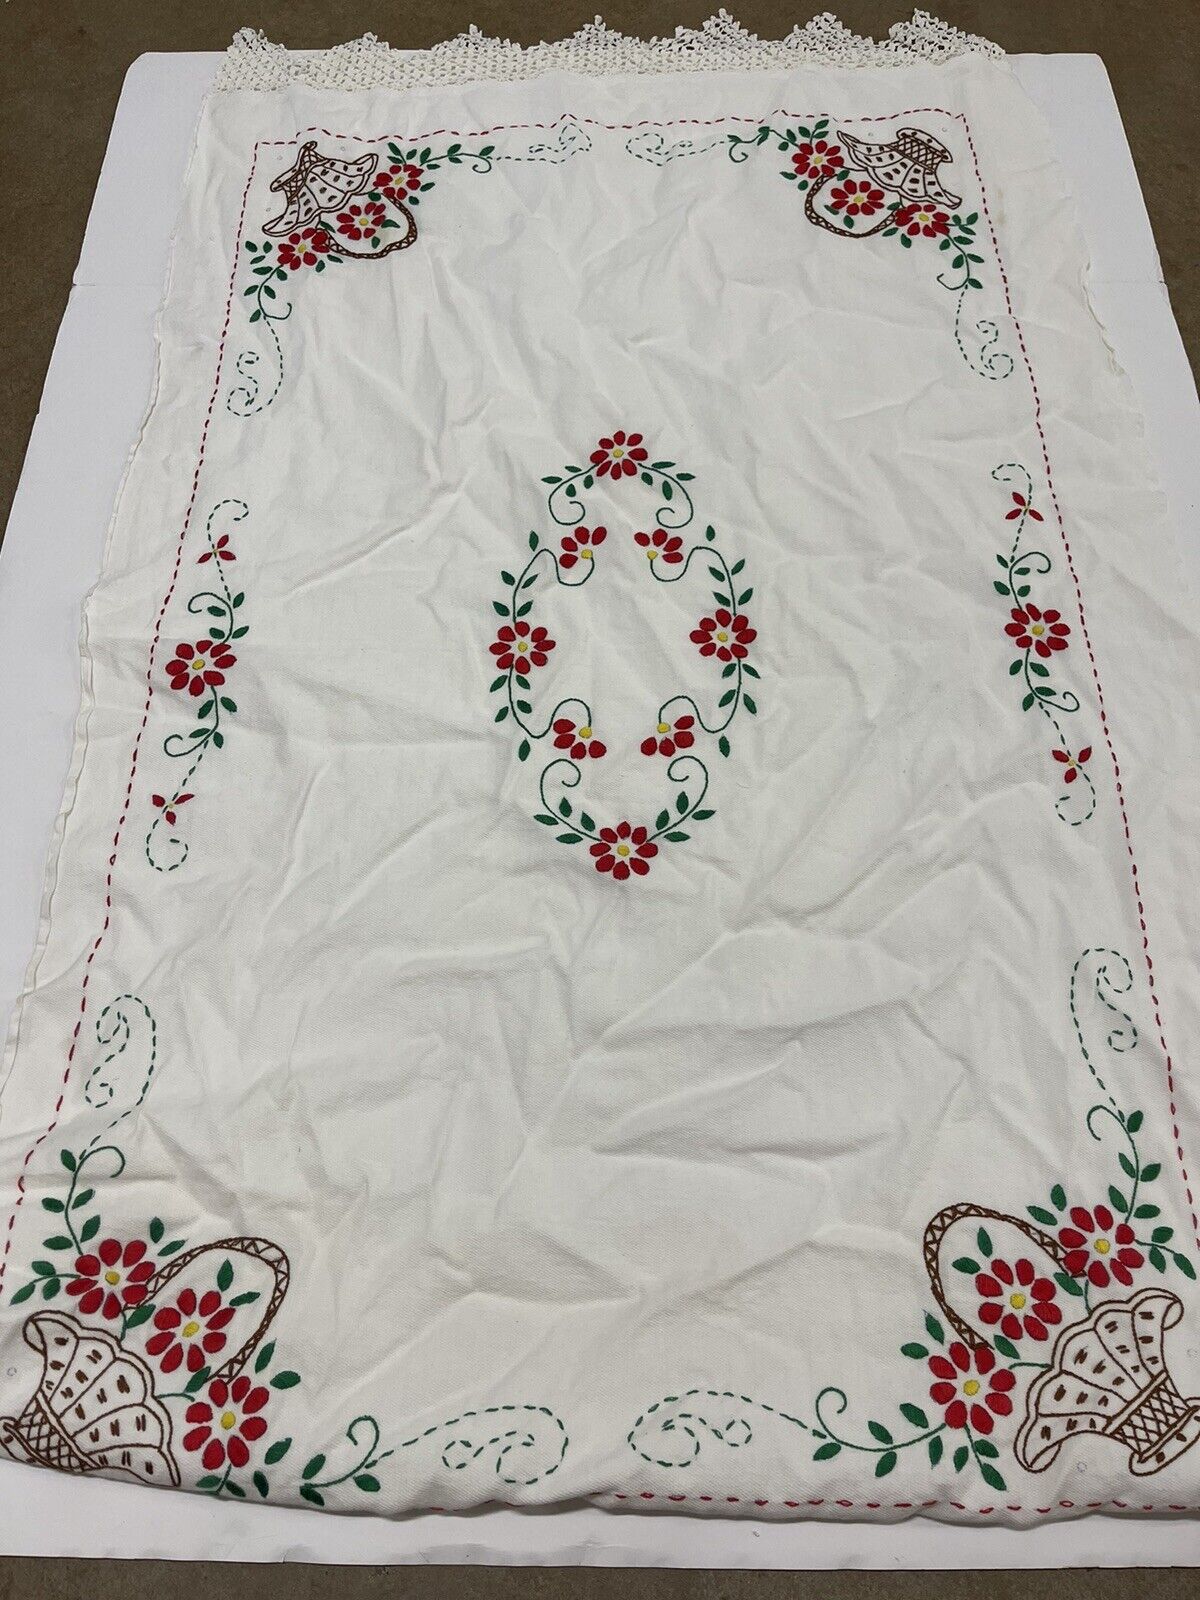 vintage embroidered tablecloth Red Flowers 48x30 White Lace edge